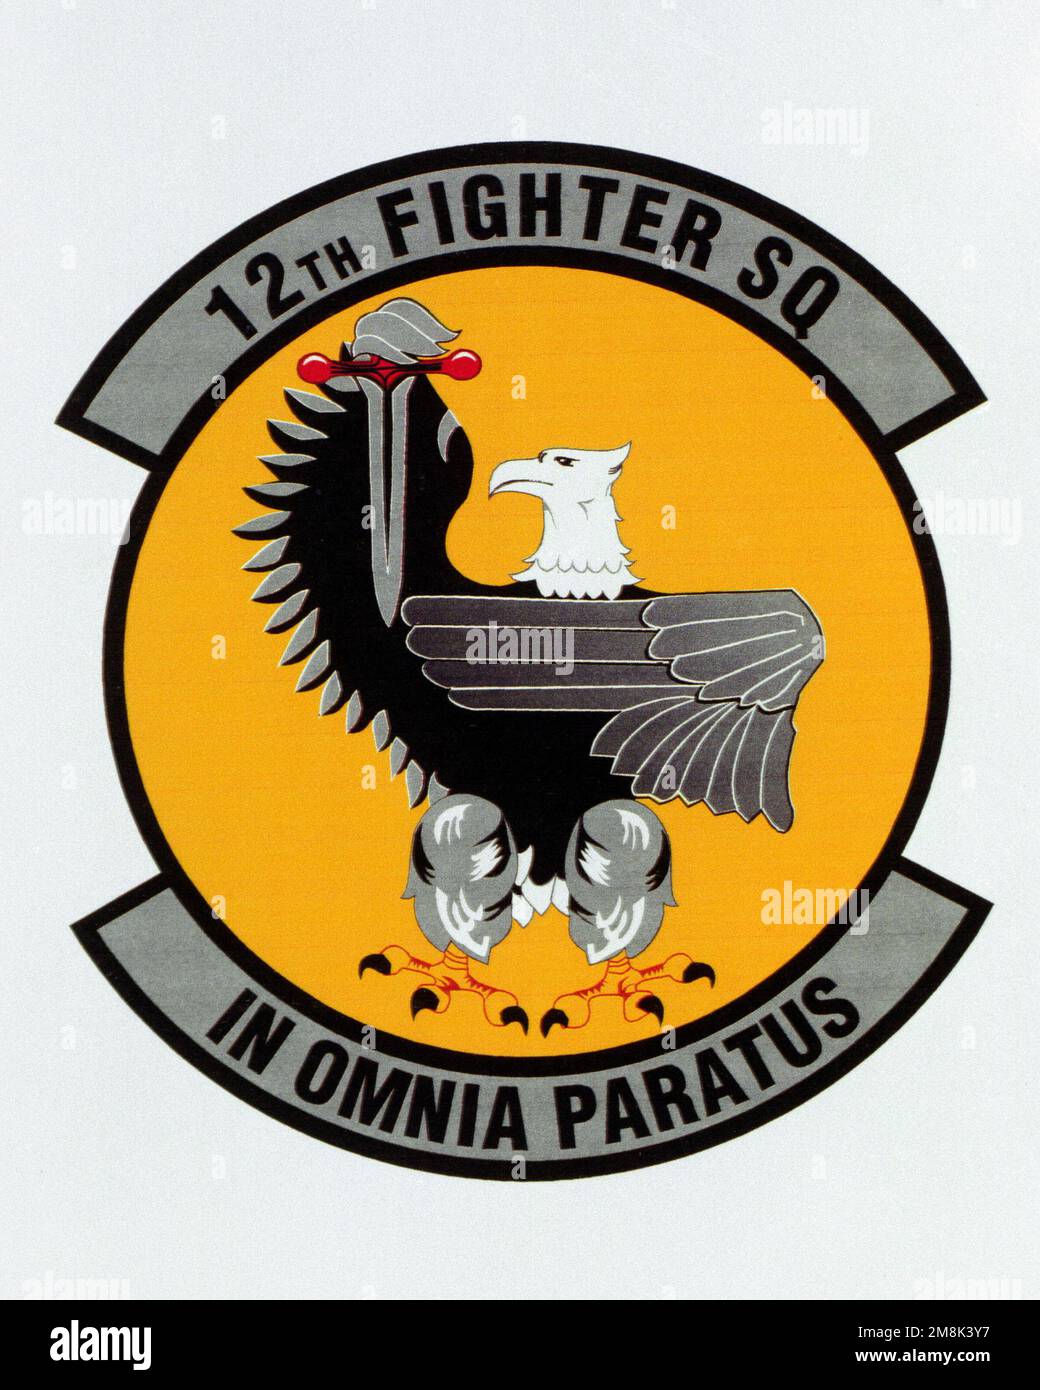 Patch designed and shot at MAXWELL AIR FORCE BASE, ALABAMA, USA - AIR FORCE ORGANIZATIONAL EMBLEMS - 1995...12th Fighter Squadron - Exact date shot unknown. Air Force Historical Research Agency, 95-225. Country: Unknown Stock Photo